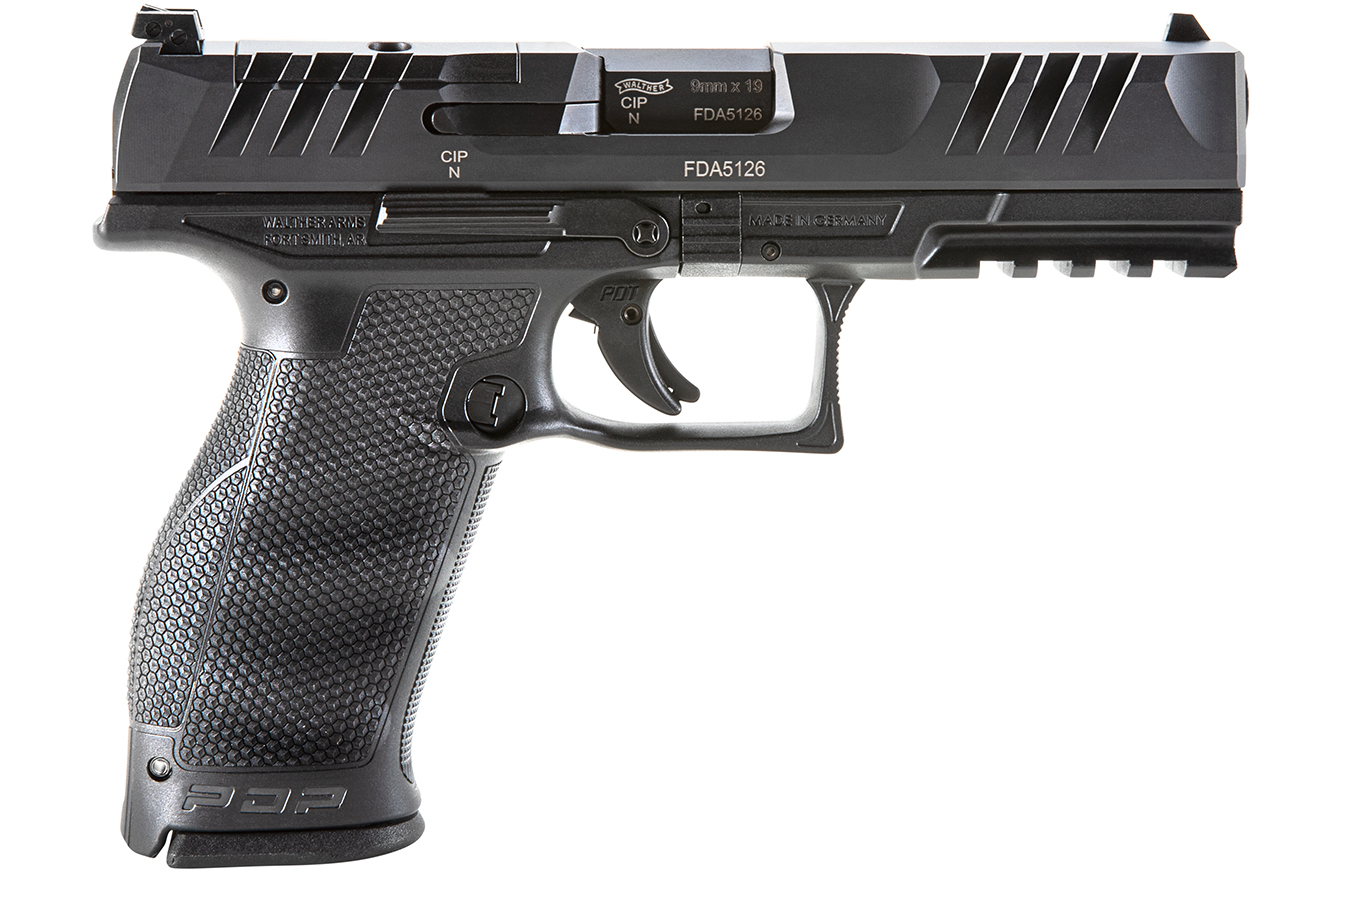 PDP FULL-SIZE 9MM OPTICS READY PISTOL WITH 4.5 INCH BARREL